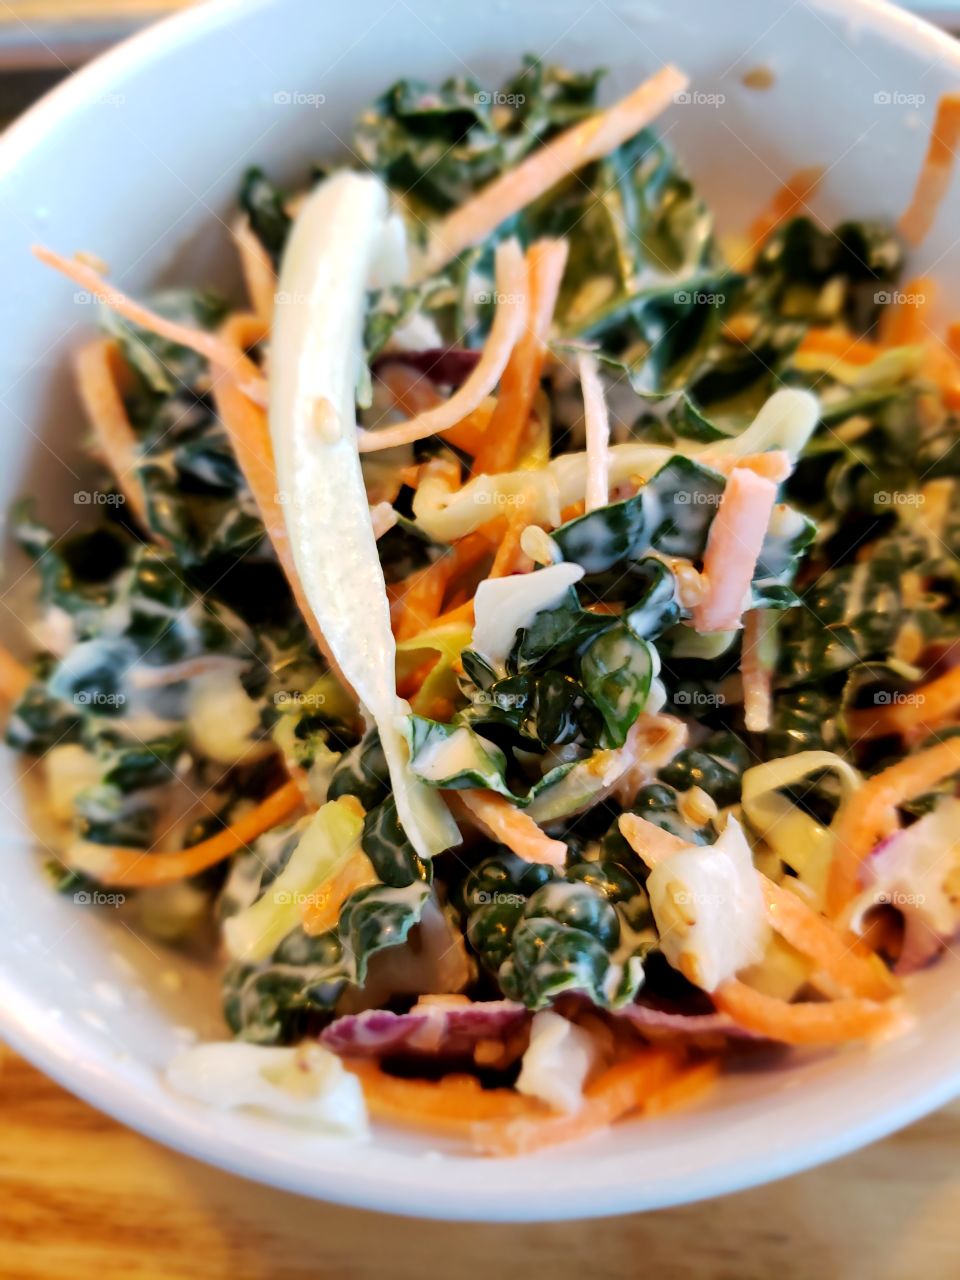 yummy kale salad from Starbird at foster city